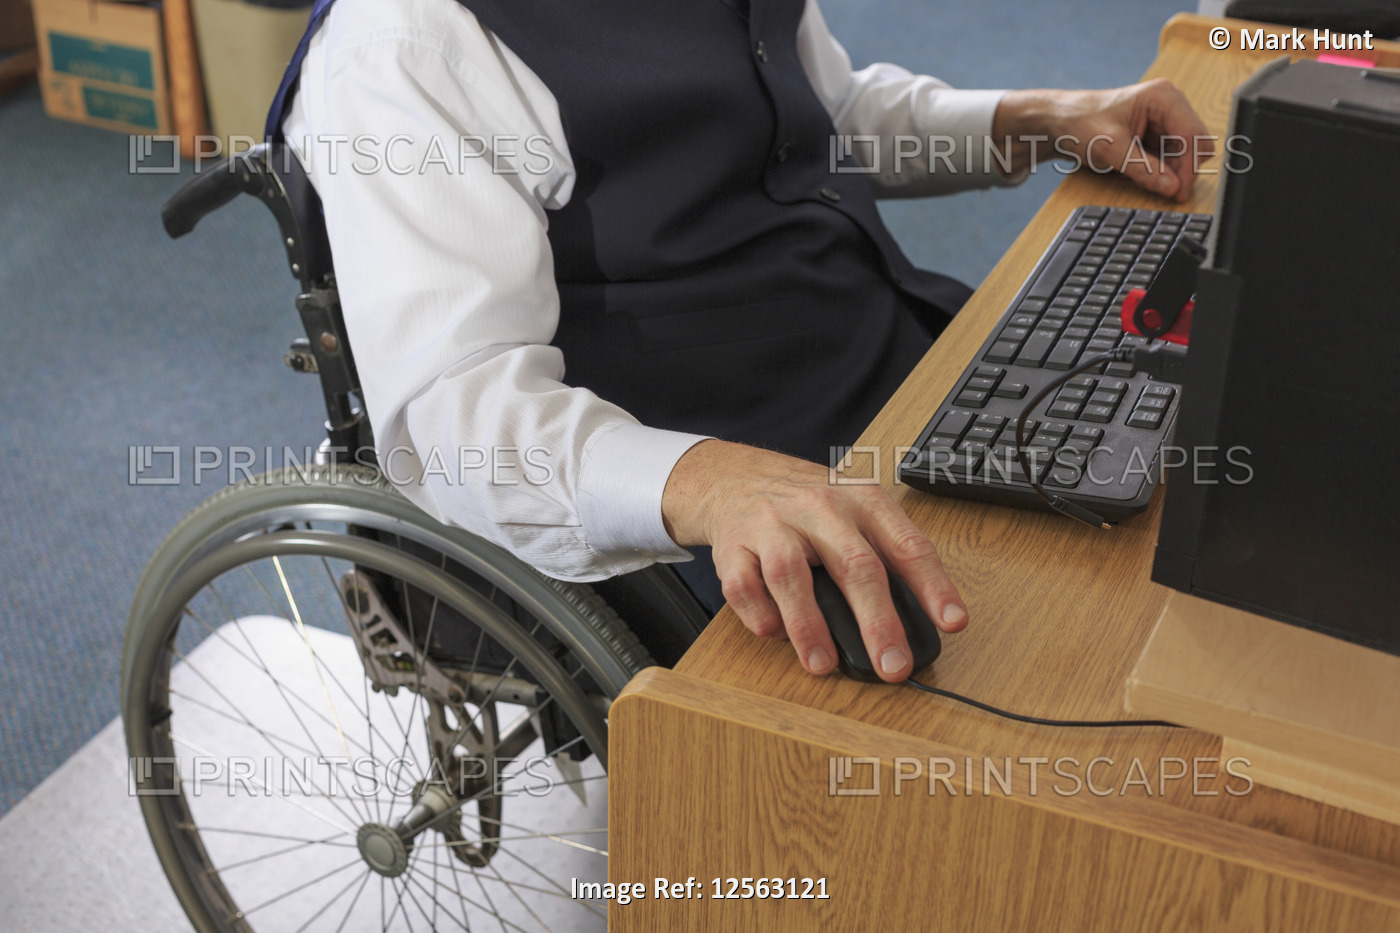 Man with Muscular Dystrophy in a wheelchair working at his computer in an office